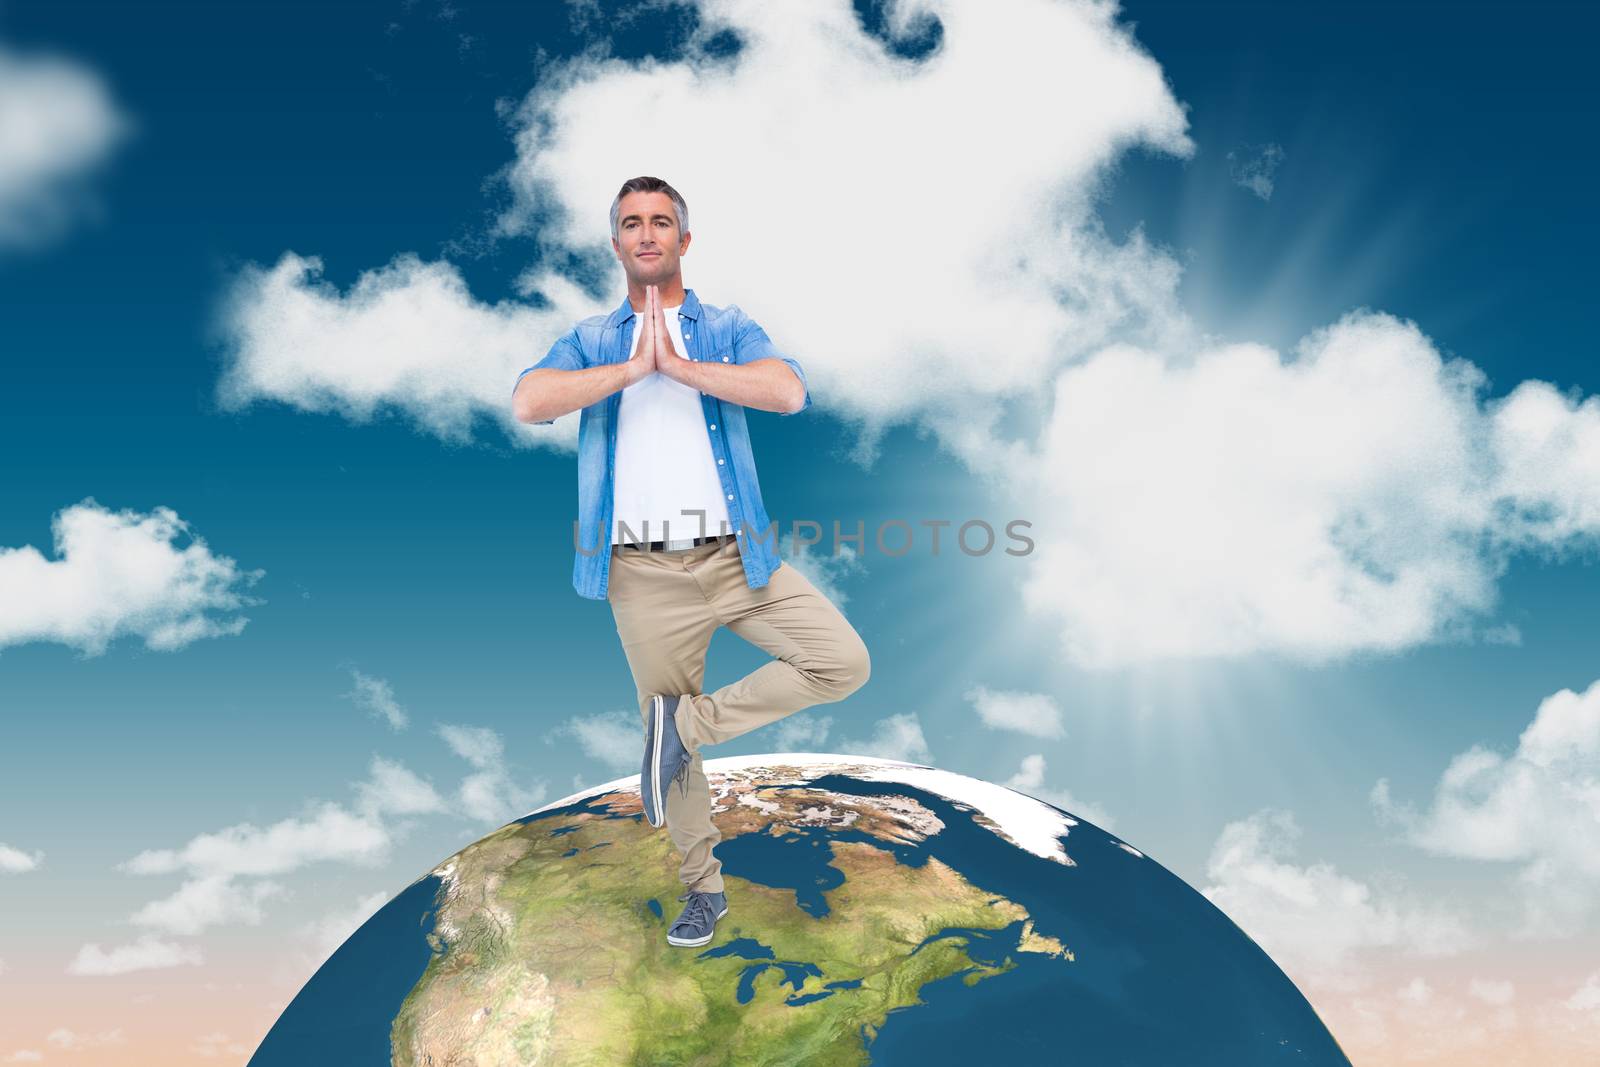 Composite image of man with grey hair in tree pose by Wavebreakmedia